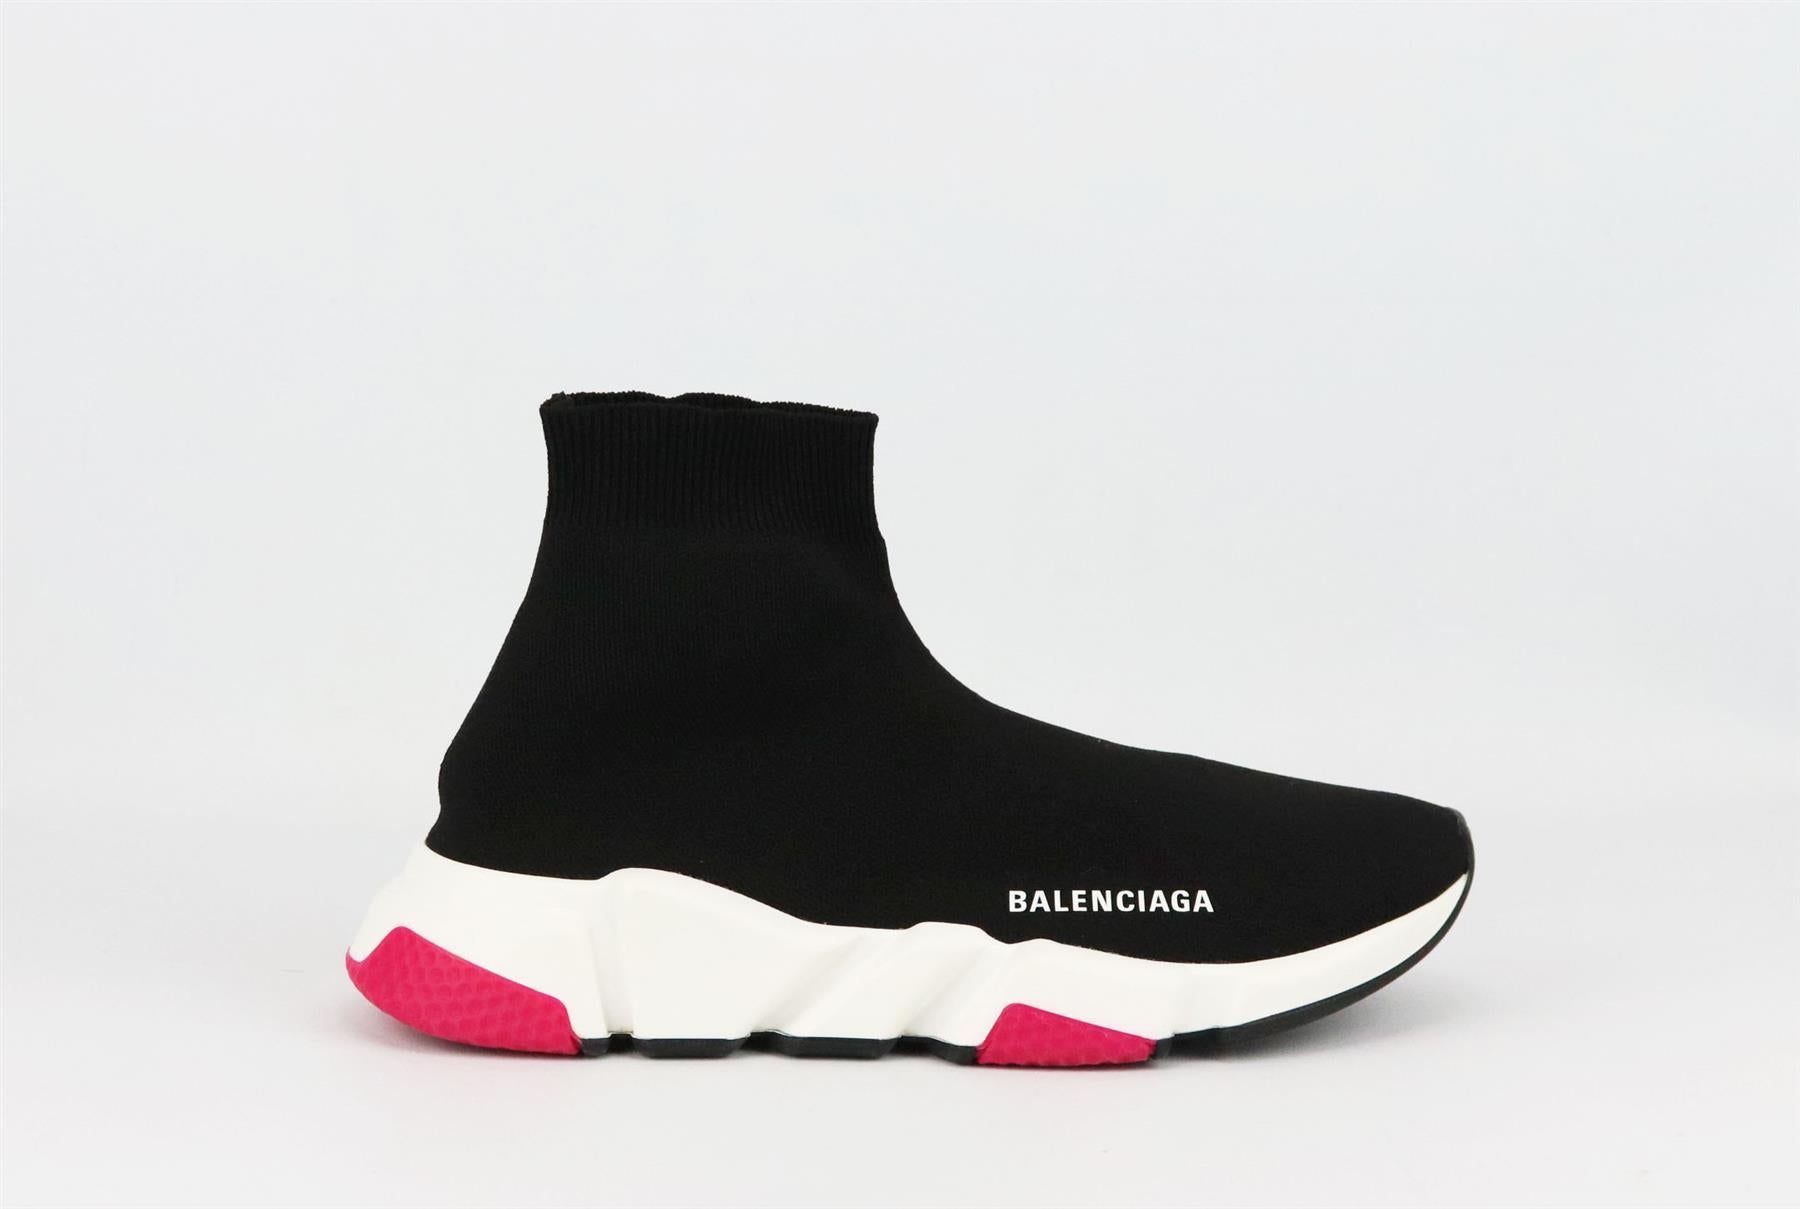 Balenciaga's 'Speed Runner' sneakers are designed for a cool sock-like fit – this season's must-have silhouette, made from black stretch-knit, this high-top style is set on a white gripped sole and subtly detailed with the brand’s emblem. 
Rubber